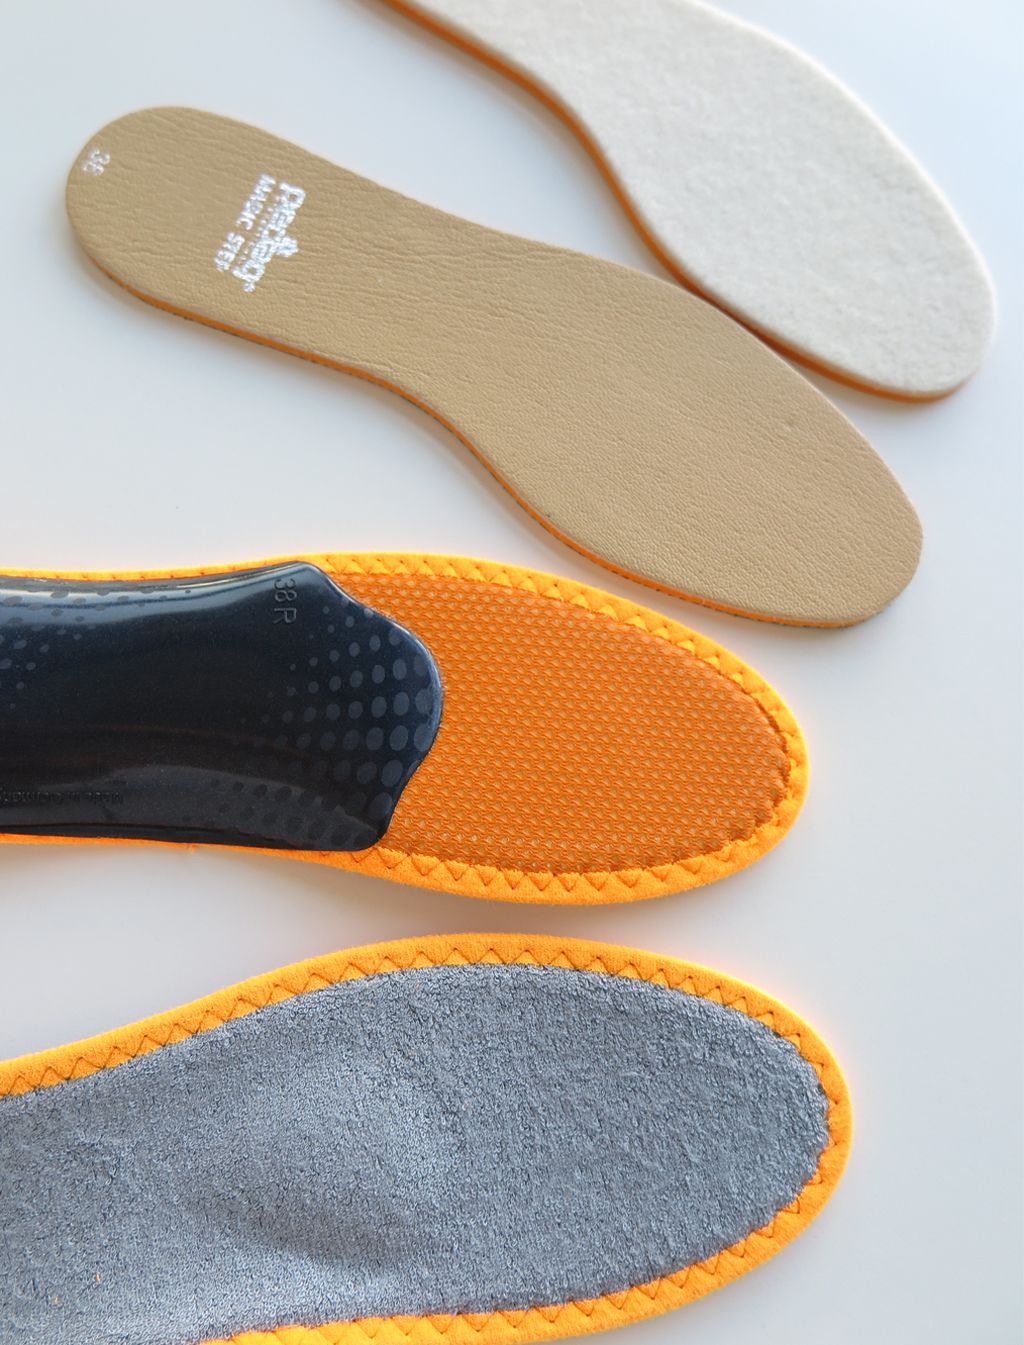 Our memory foam range of insoles